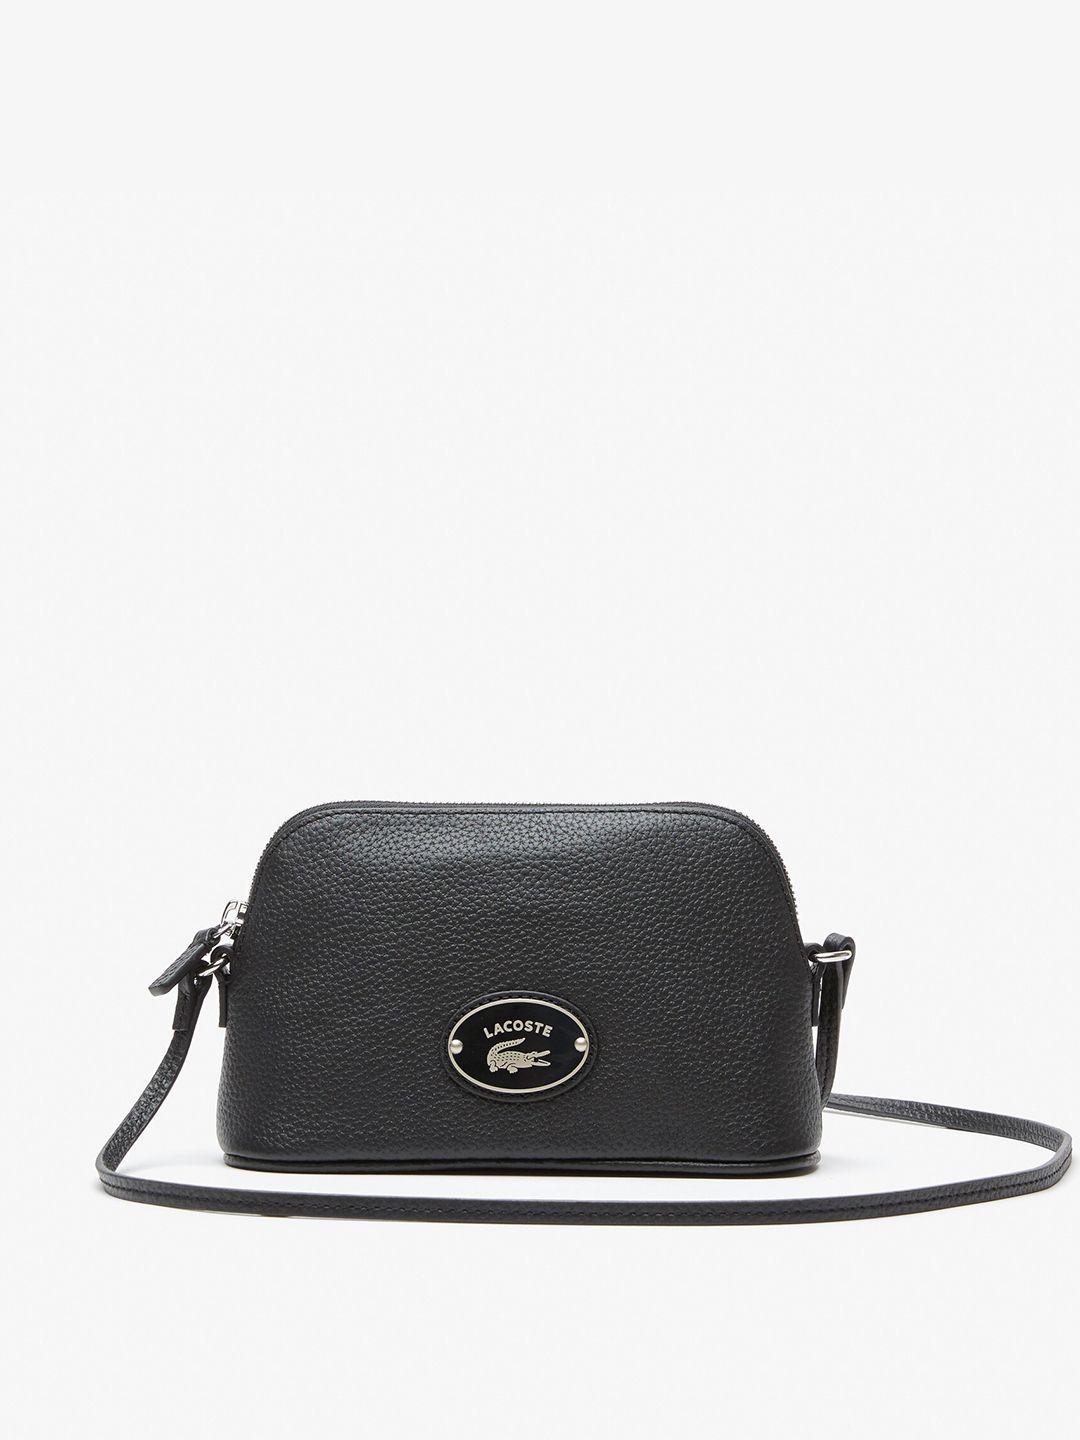 lacoste women leather dome crossover bag